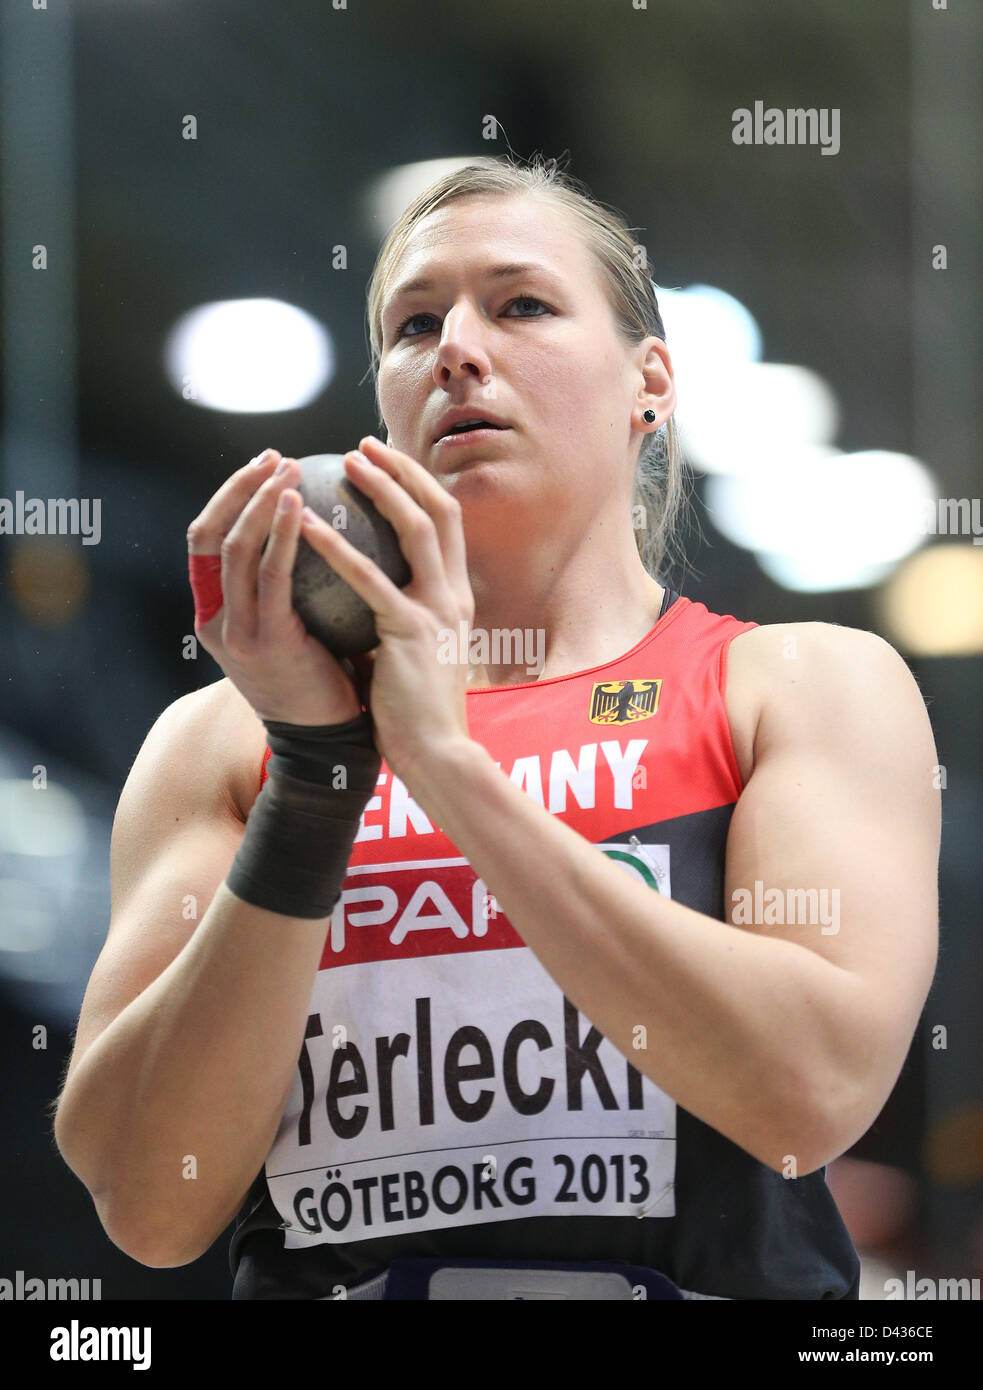 Germany's Josephine Terlecki competes in the women's shot put final event during the IAAF European Athletics Indoor Championships 2013 in the Scandinavium Arena in Gothenburg, Sweden, March 3, 2013. Foto: Christian Charisius/dpa +++(c) dpa - Bildfunk+++ Stock Photo